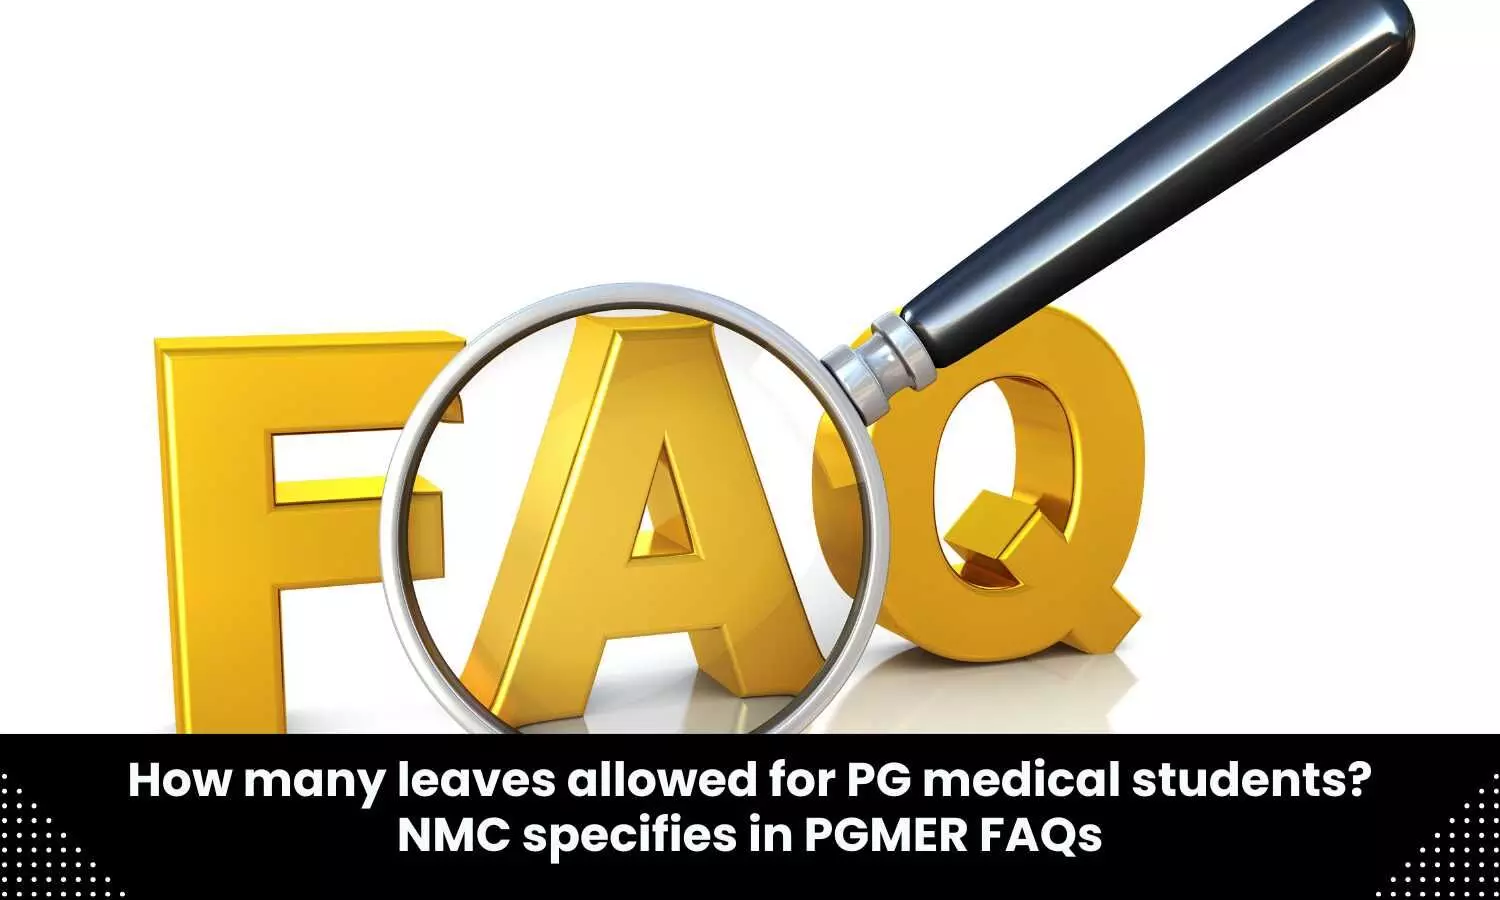 NMC specifies how many leaves medico can take while pursuing PG medical courses